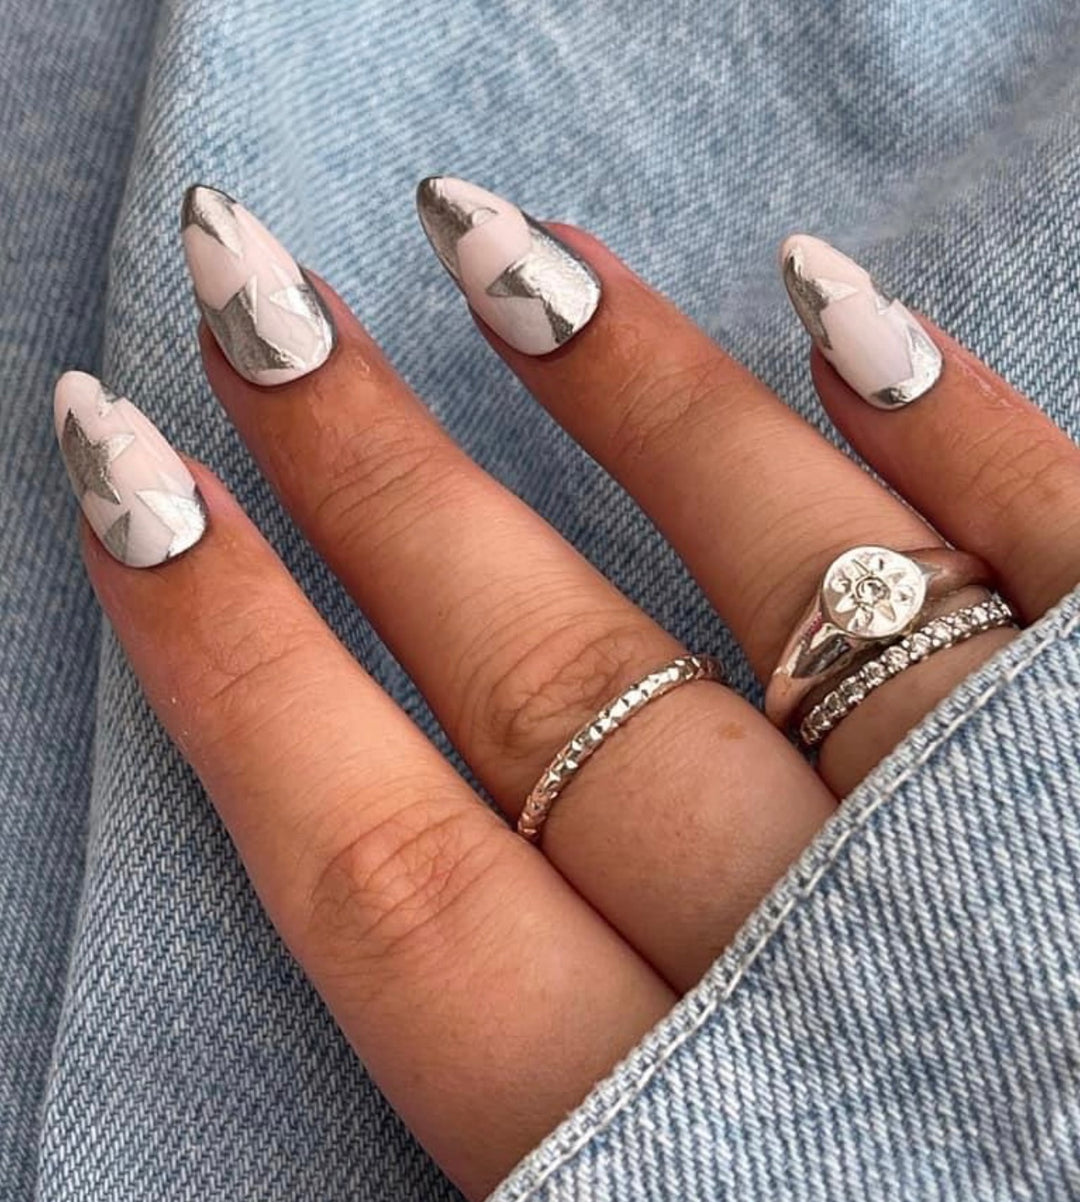 NAILS BY ELISIA WILLETTS